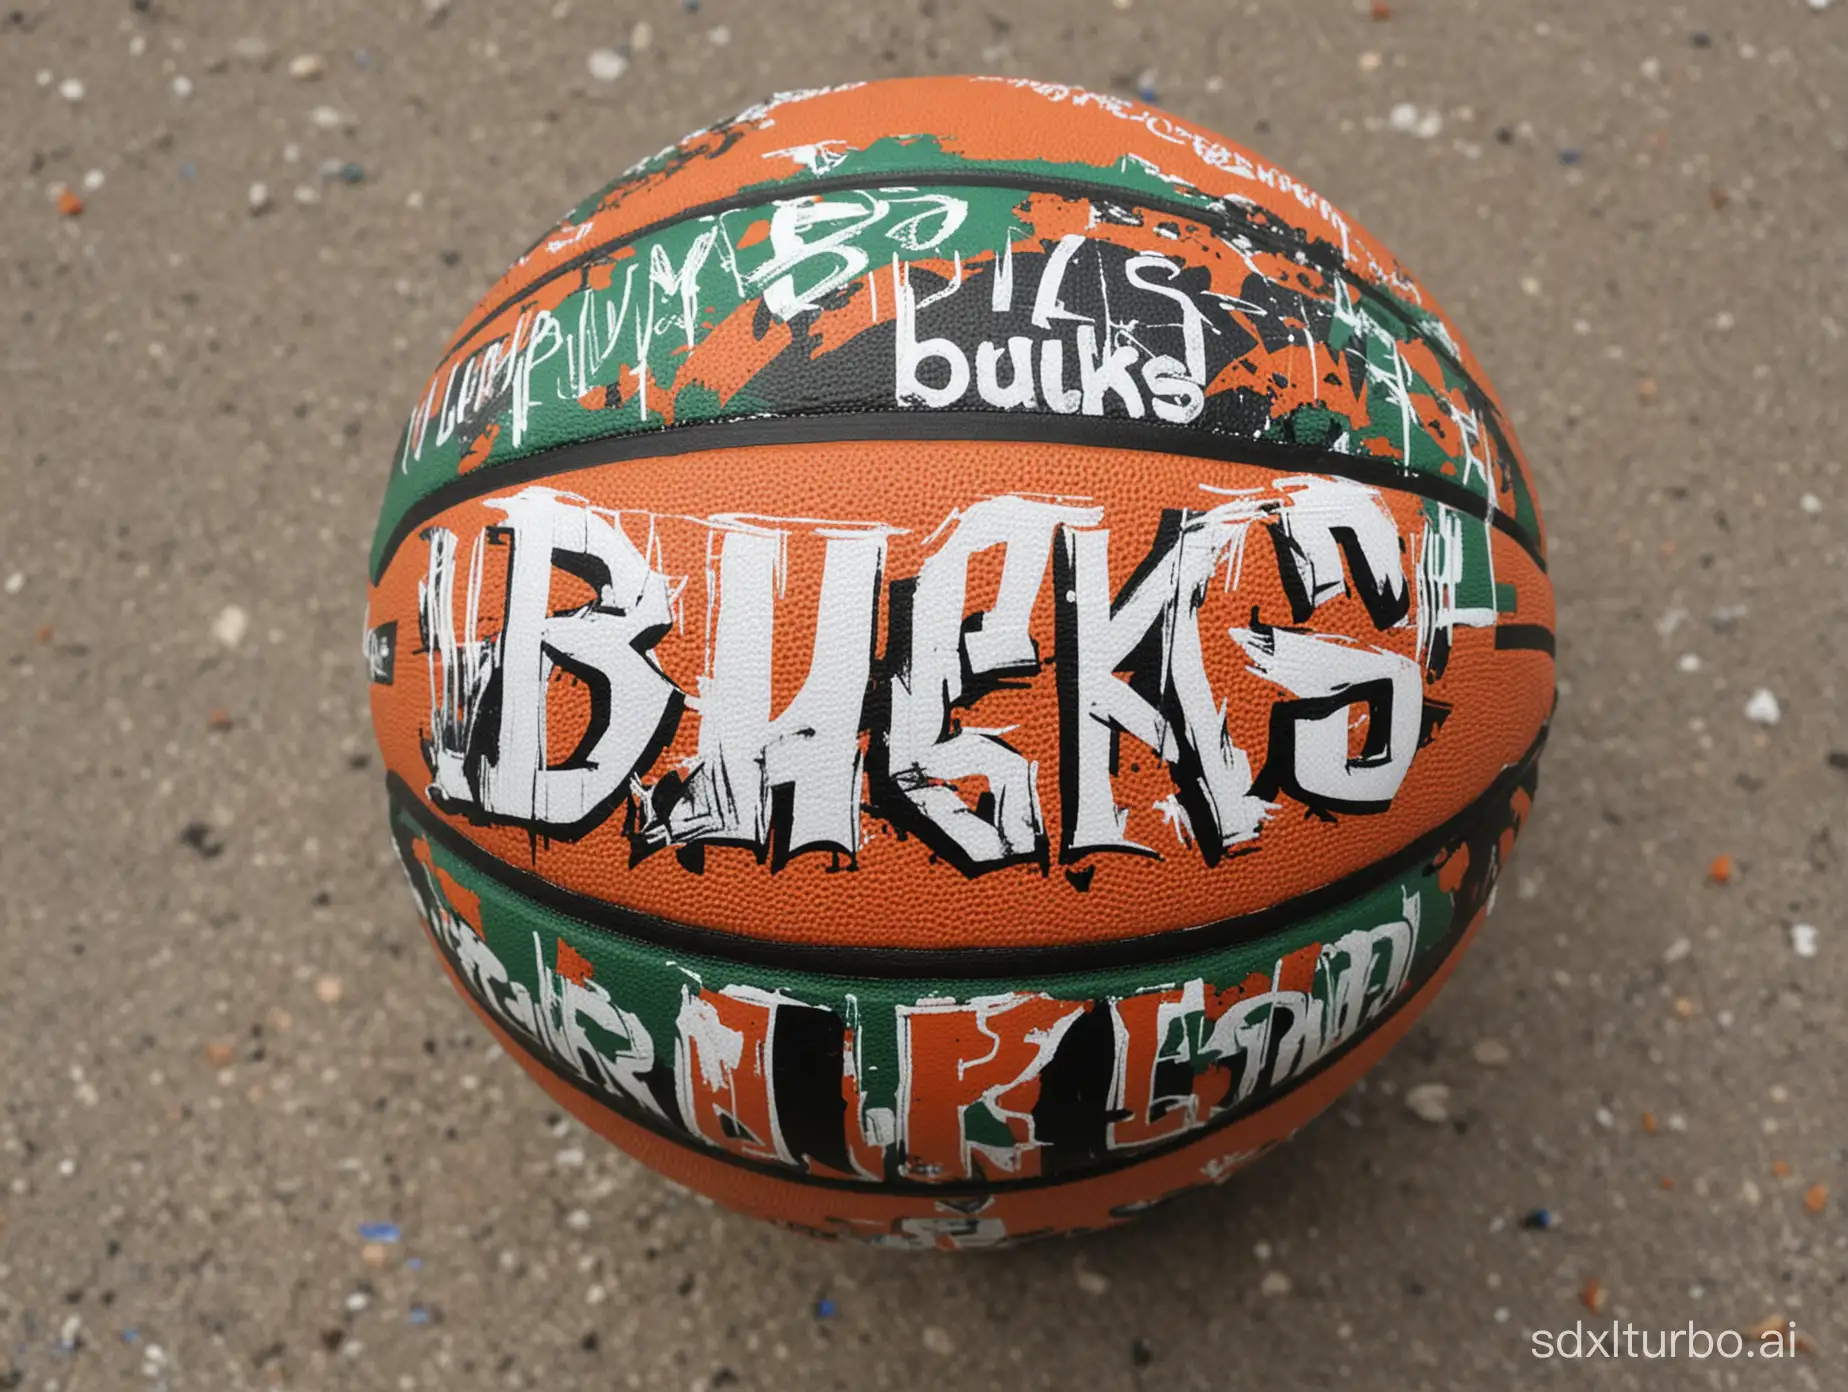 image a basketball with tagging on it saying "bucks". The basketball should be filled with graffiti that says "I AM bucks".